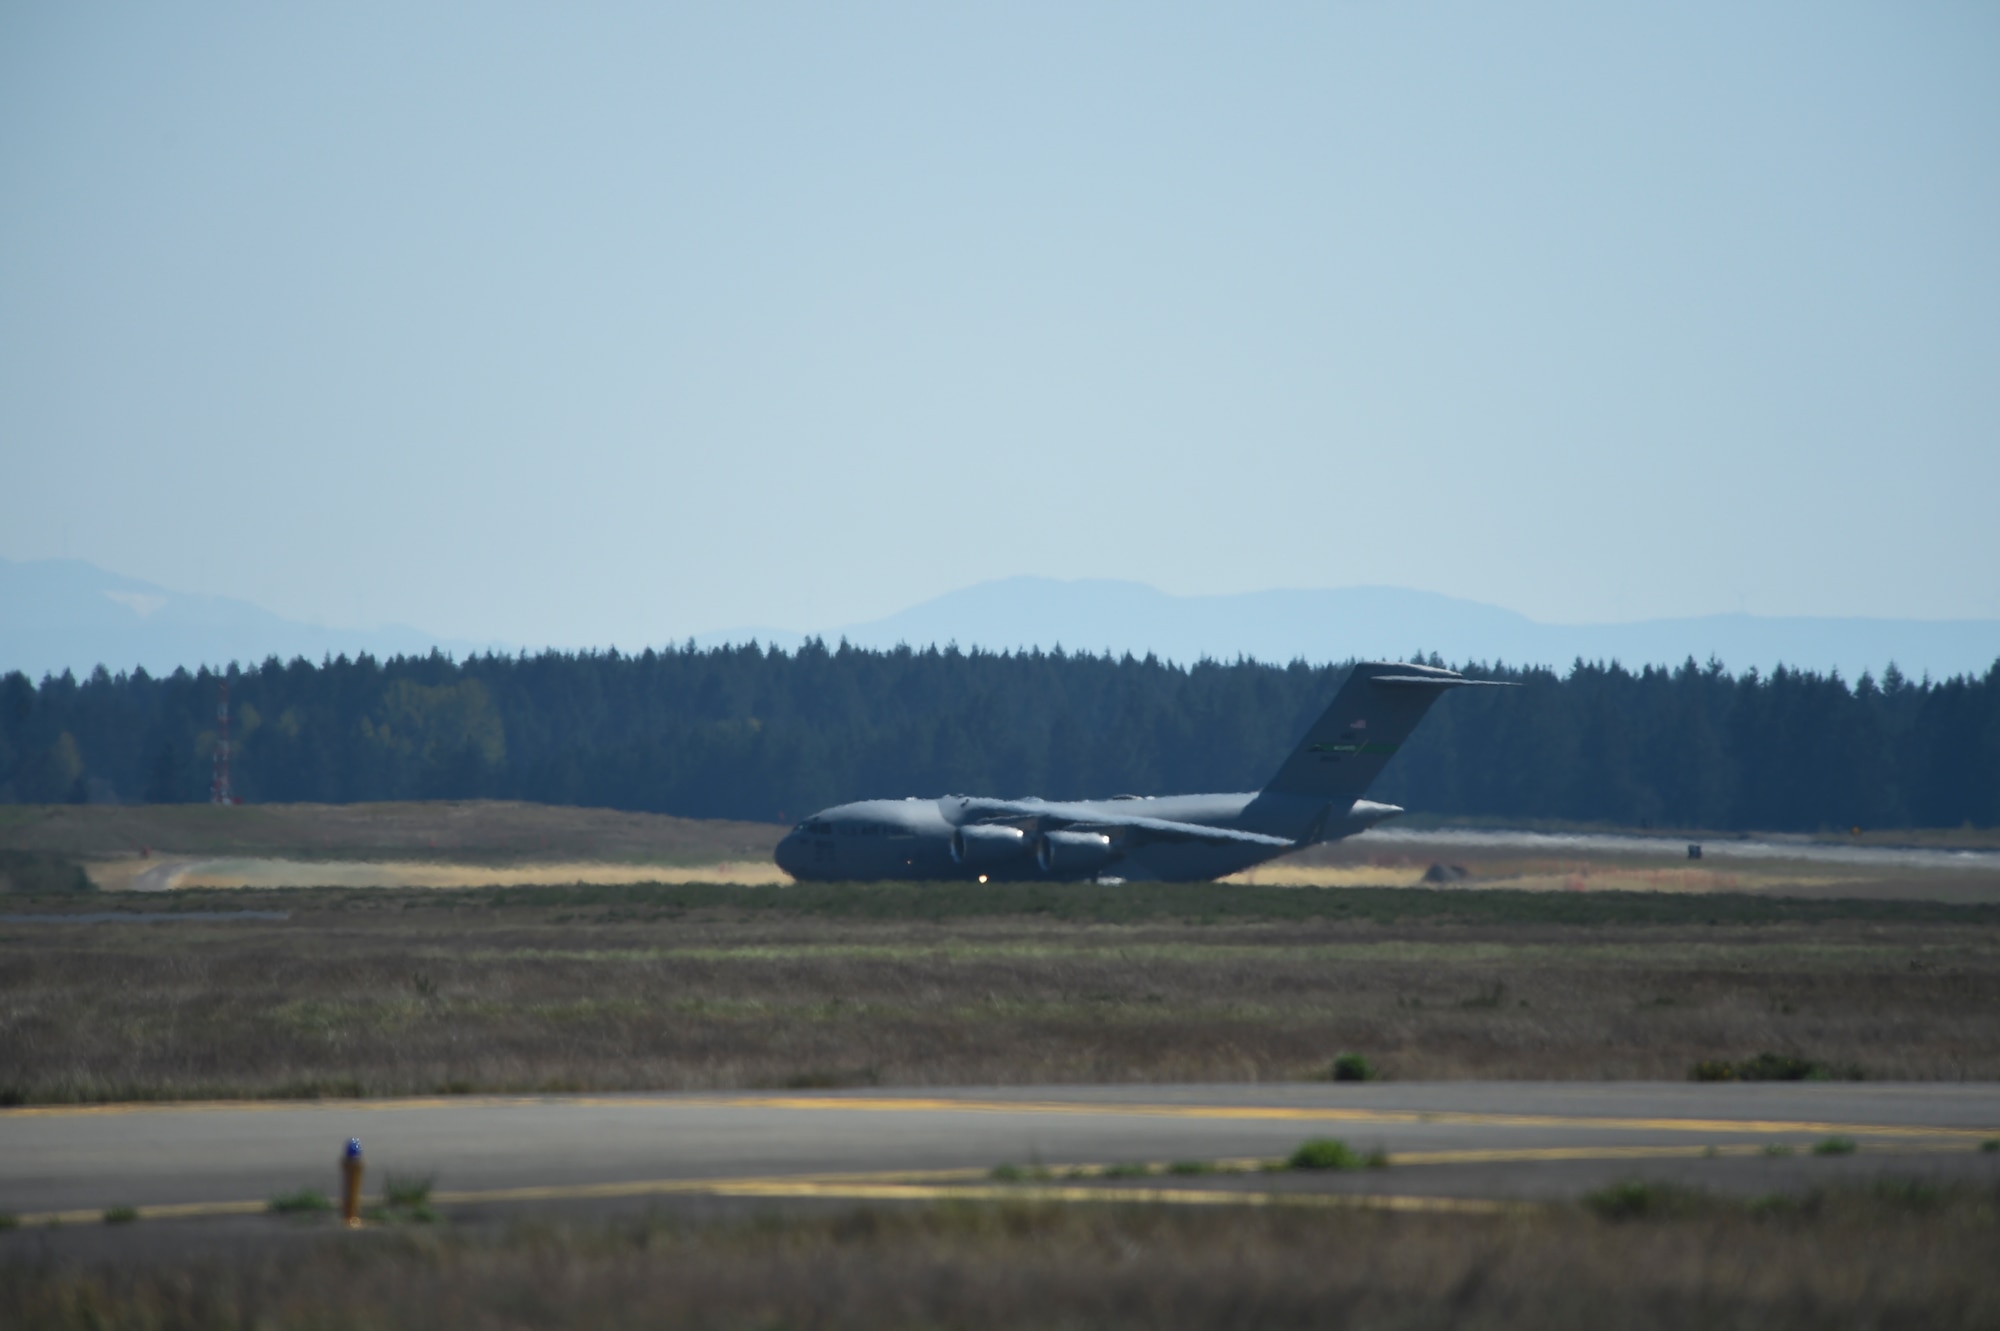 A C-17 Globemaster III assigned to the 62nd Airlift Wing taxis for a wet-wing defuel procedure on the flightline at Joint Base Lewis-McChord, Washington, April 21, 2021, as part of Exercise Rainier War. For the first time in Team McChord’s history, Airmen with the 62nd AW and 627th Air Base Group demonstrated a wet-wing defuel procedure on a C-17. (U.S. Air Force photo by Master Sgt. Julius Delos Reyes)